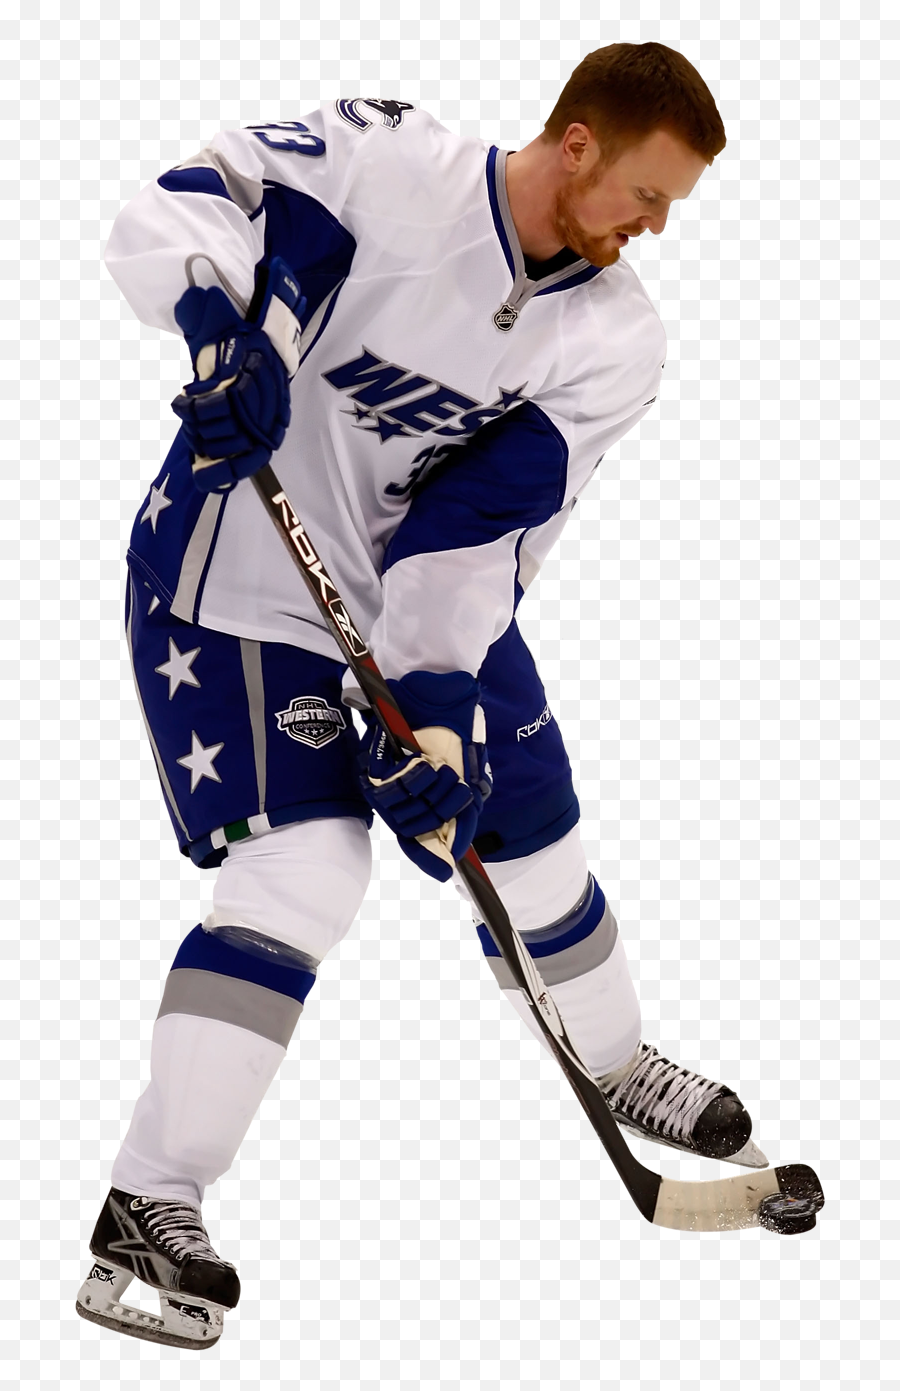 Hockey Icon Clipart 33300 - Web Icons Png Back Hockey Player Isolated Transparent,Hockey Player Icon